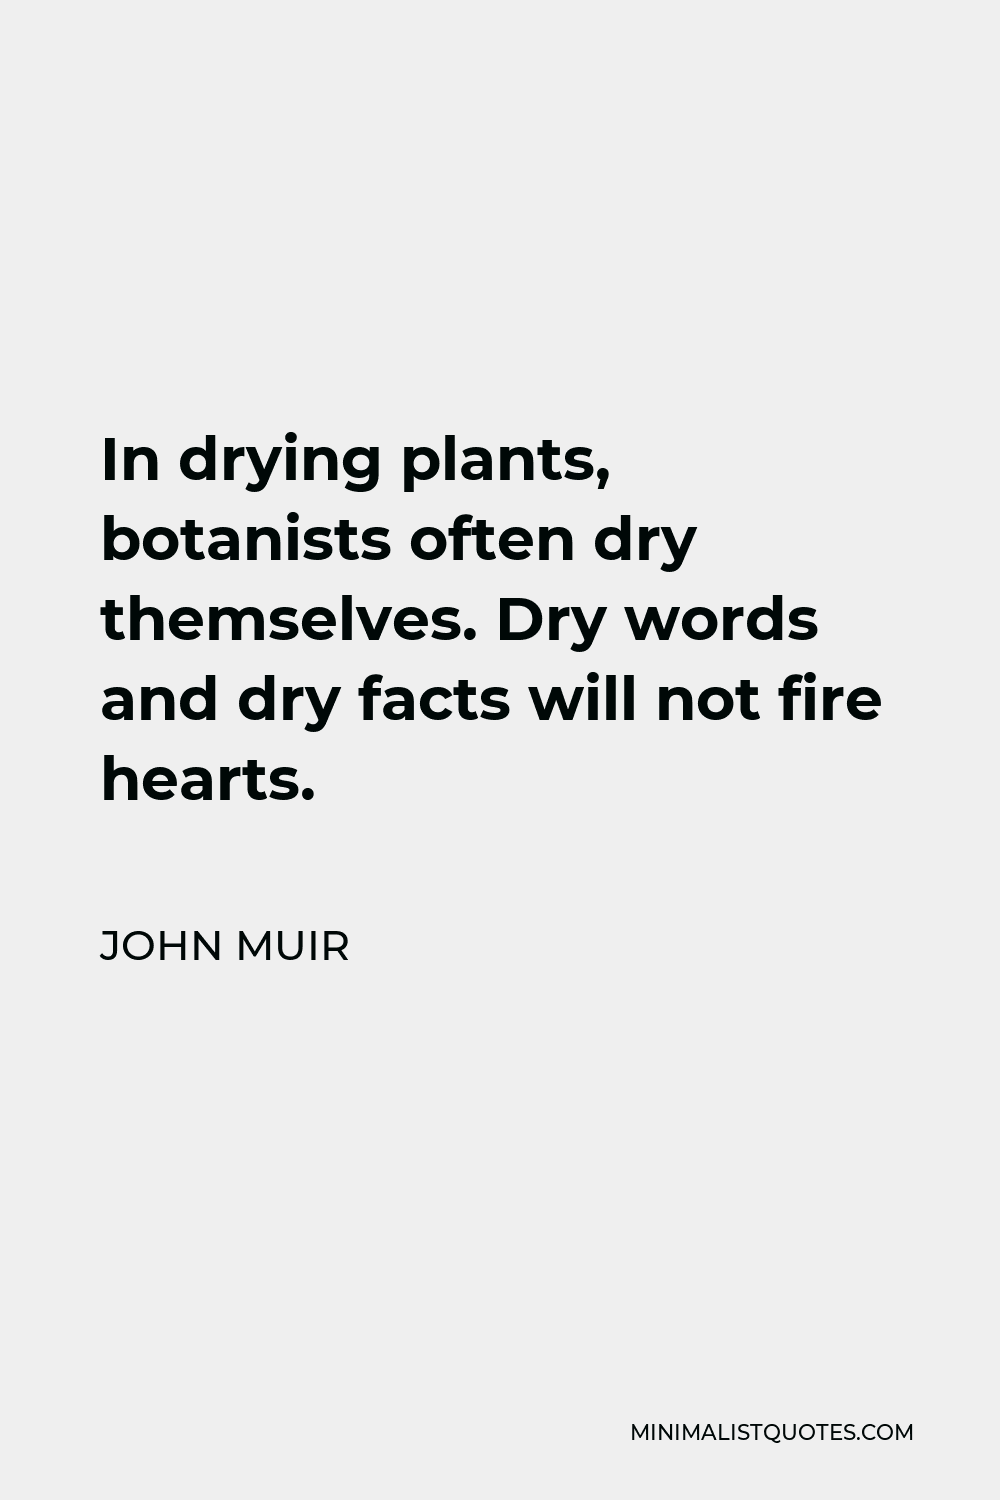 John Muir Quote - In drying plants, botanists often dry themselves. Dry words and dry facts will not fire hearts.